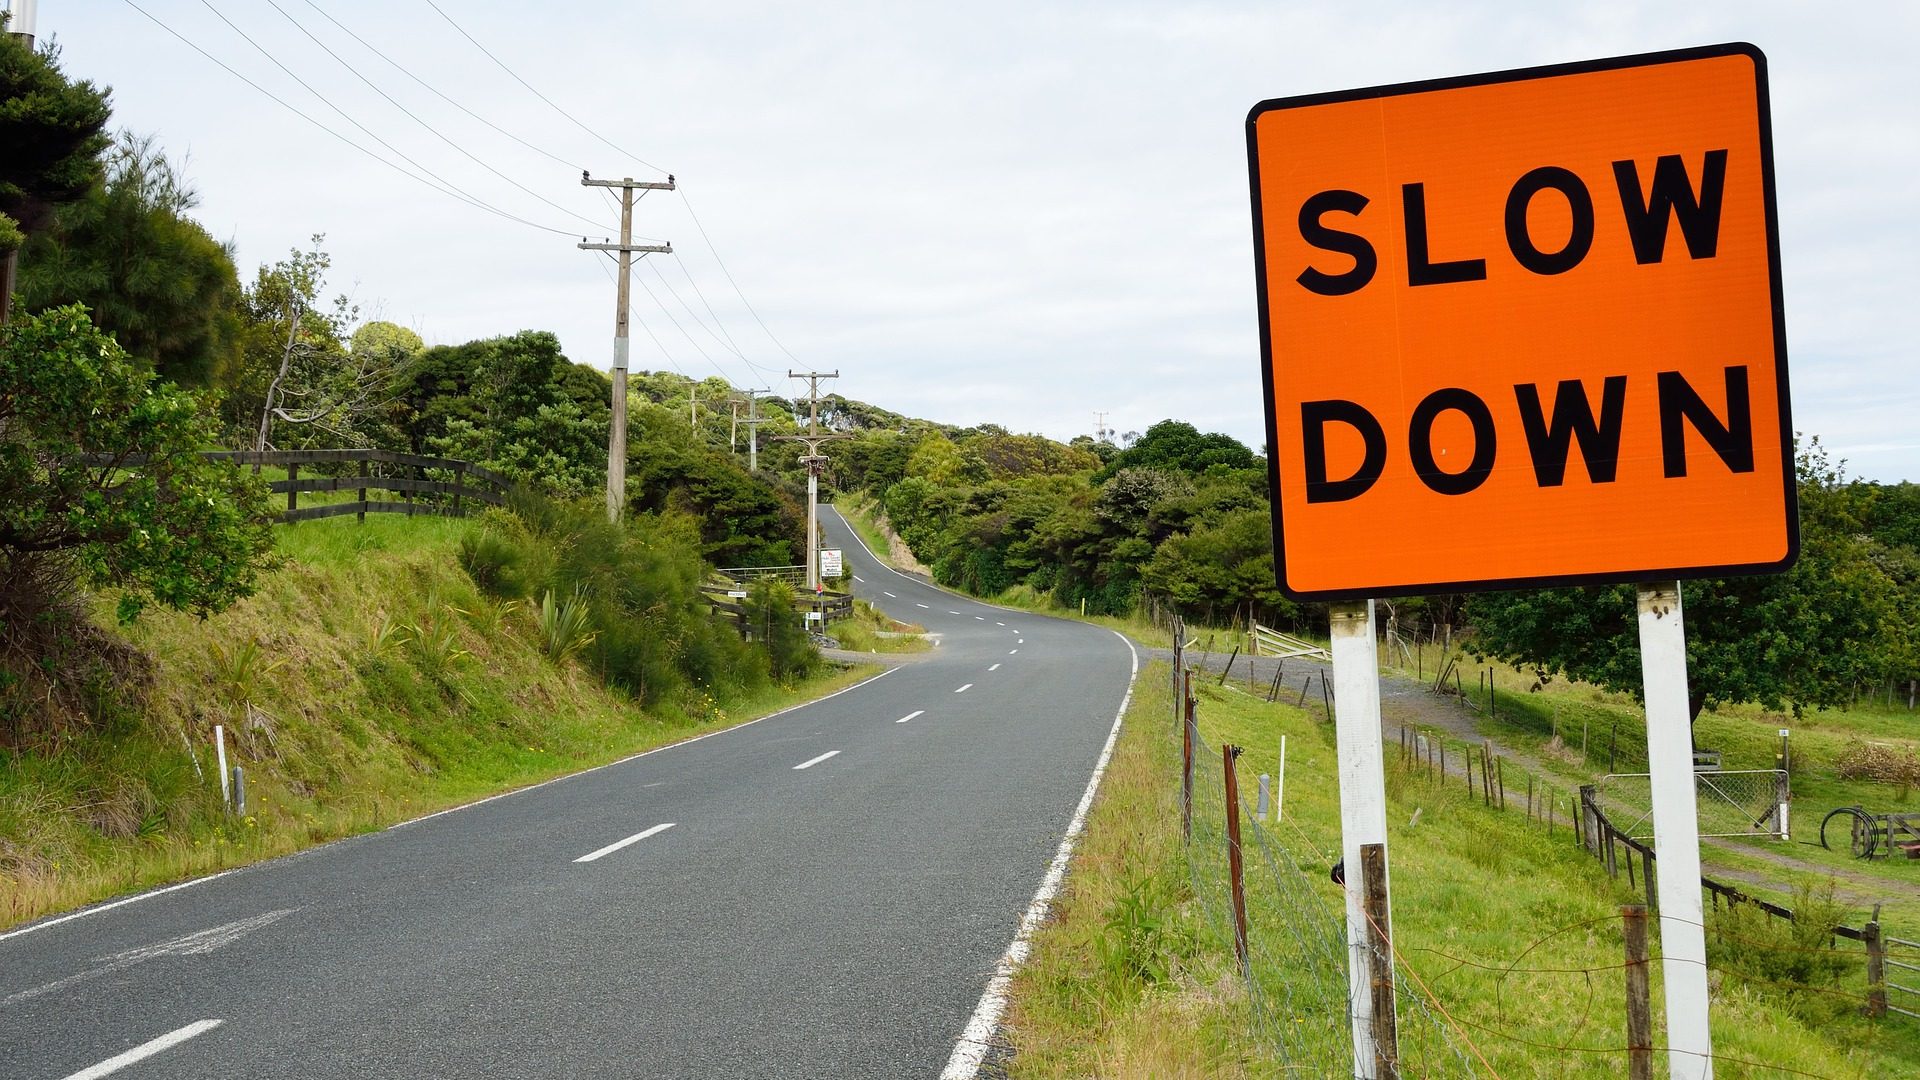 A road with a "slow down" sign. A symbol of pacing and rest for long covid